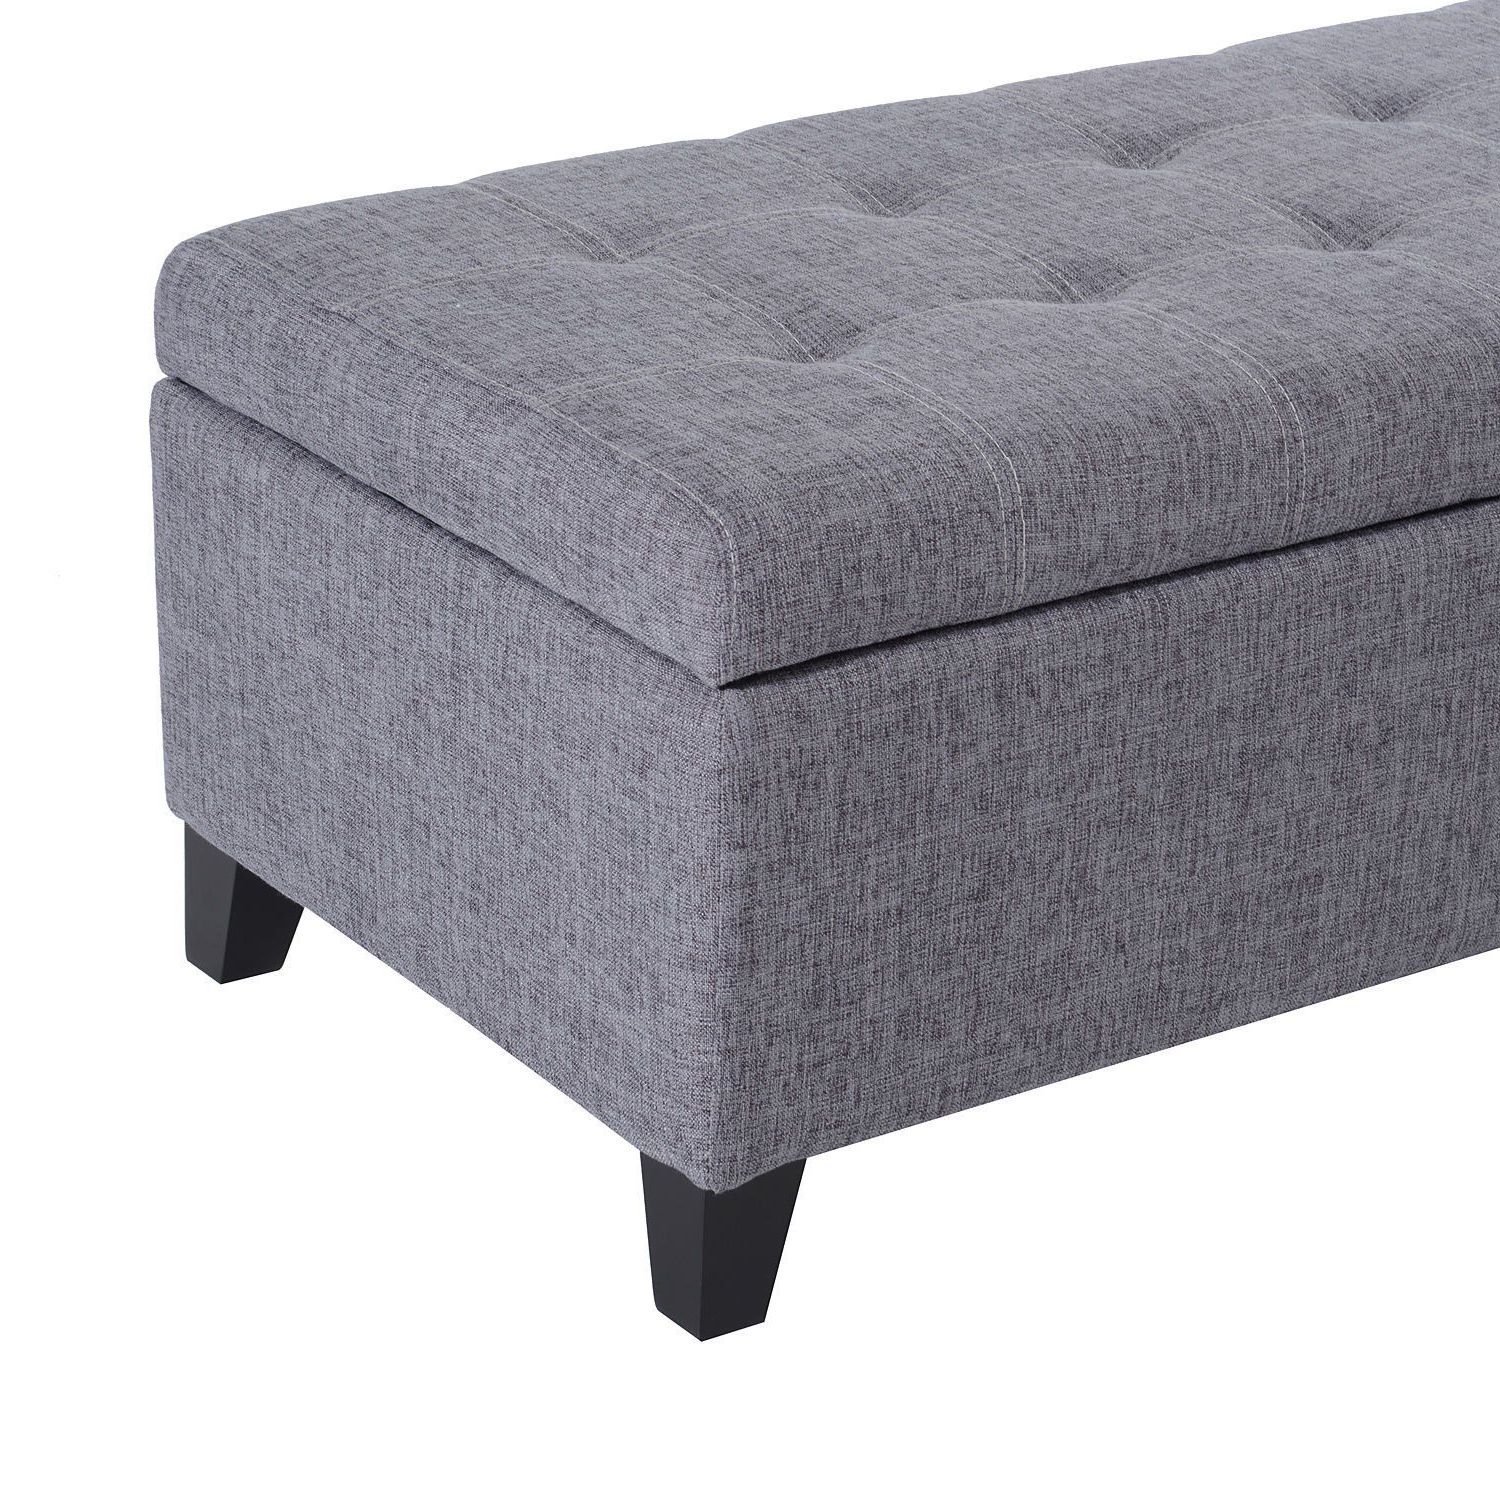 Fashionable Charcoal Fabric Tufted Storage Ottomans Within Homcom 51" Large Tufted Linen Fabric Ottoman Storage Bench With Soft (View 8 of 10)